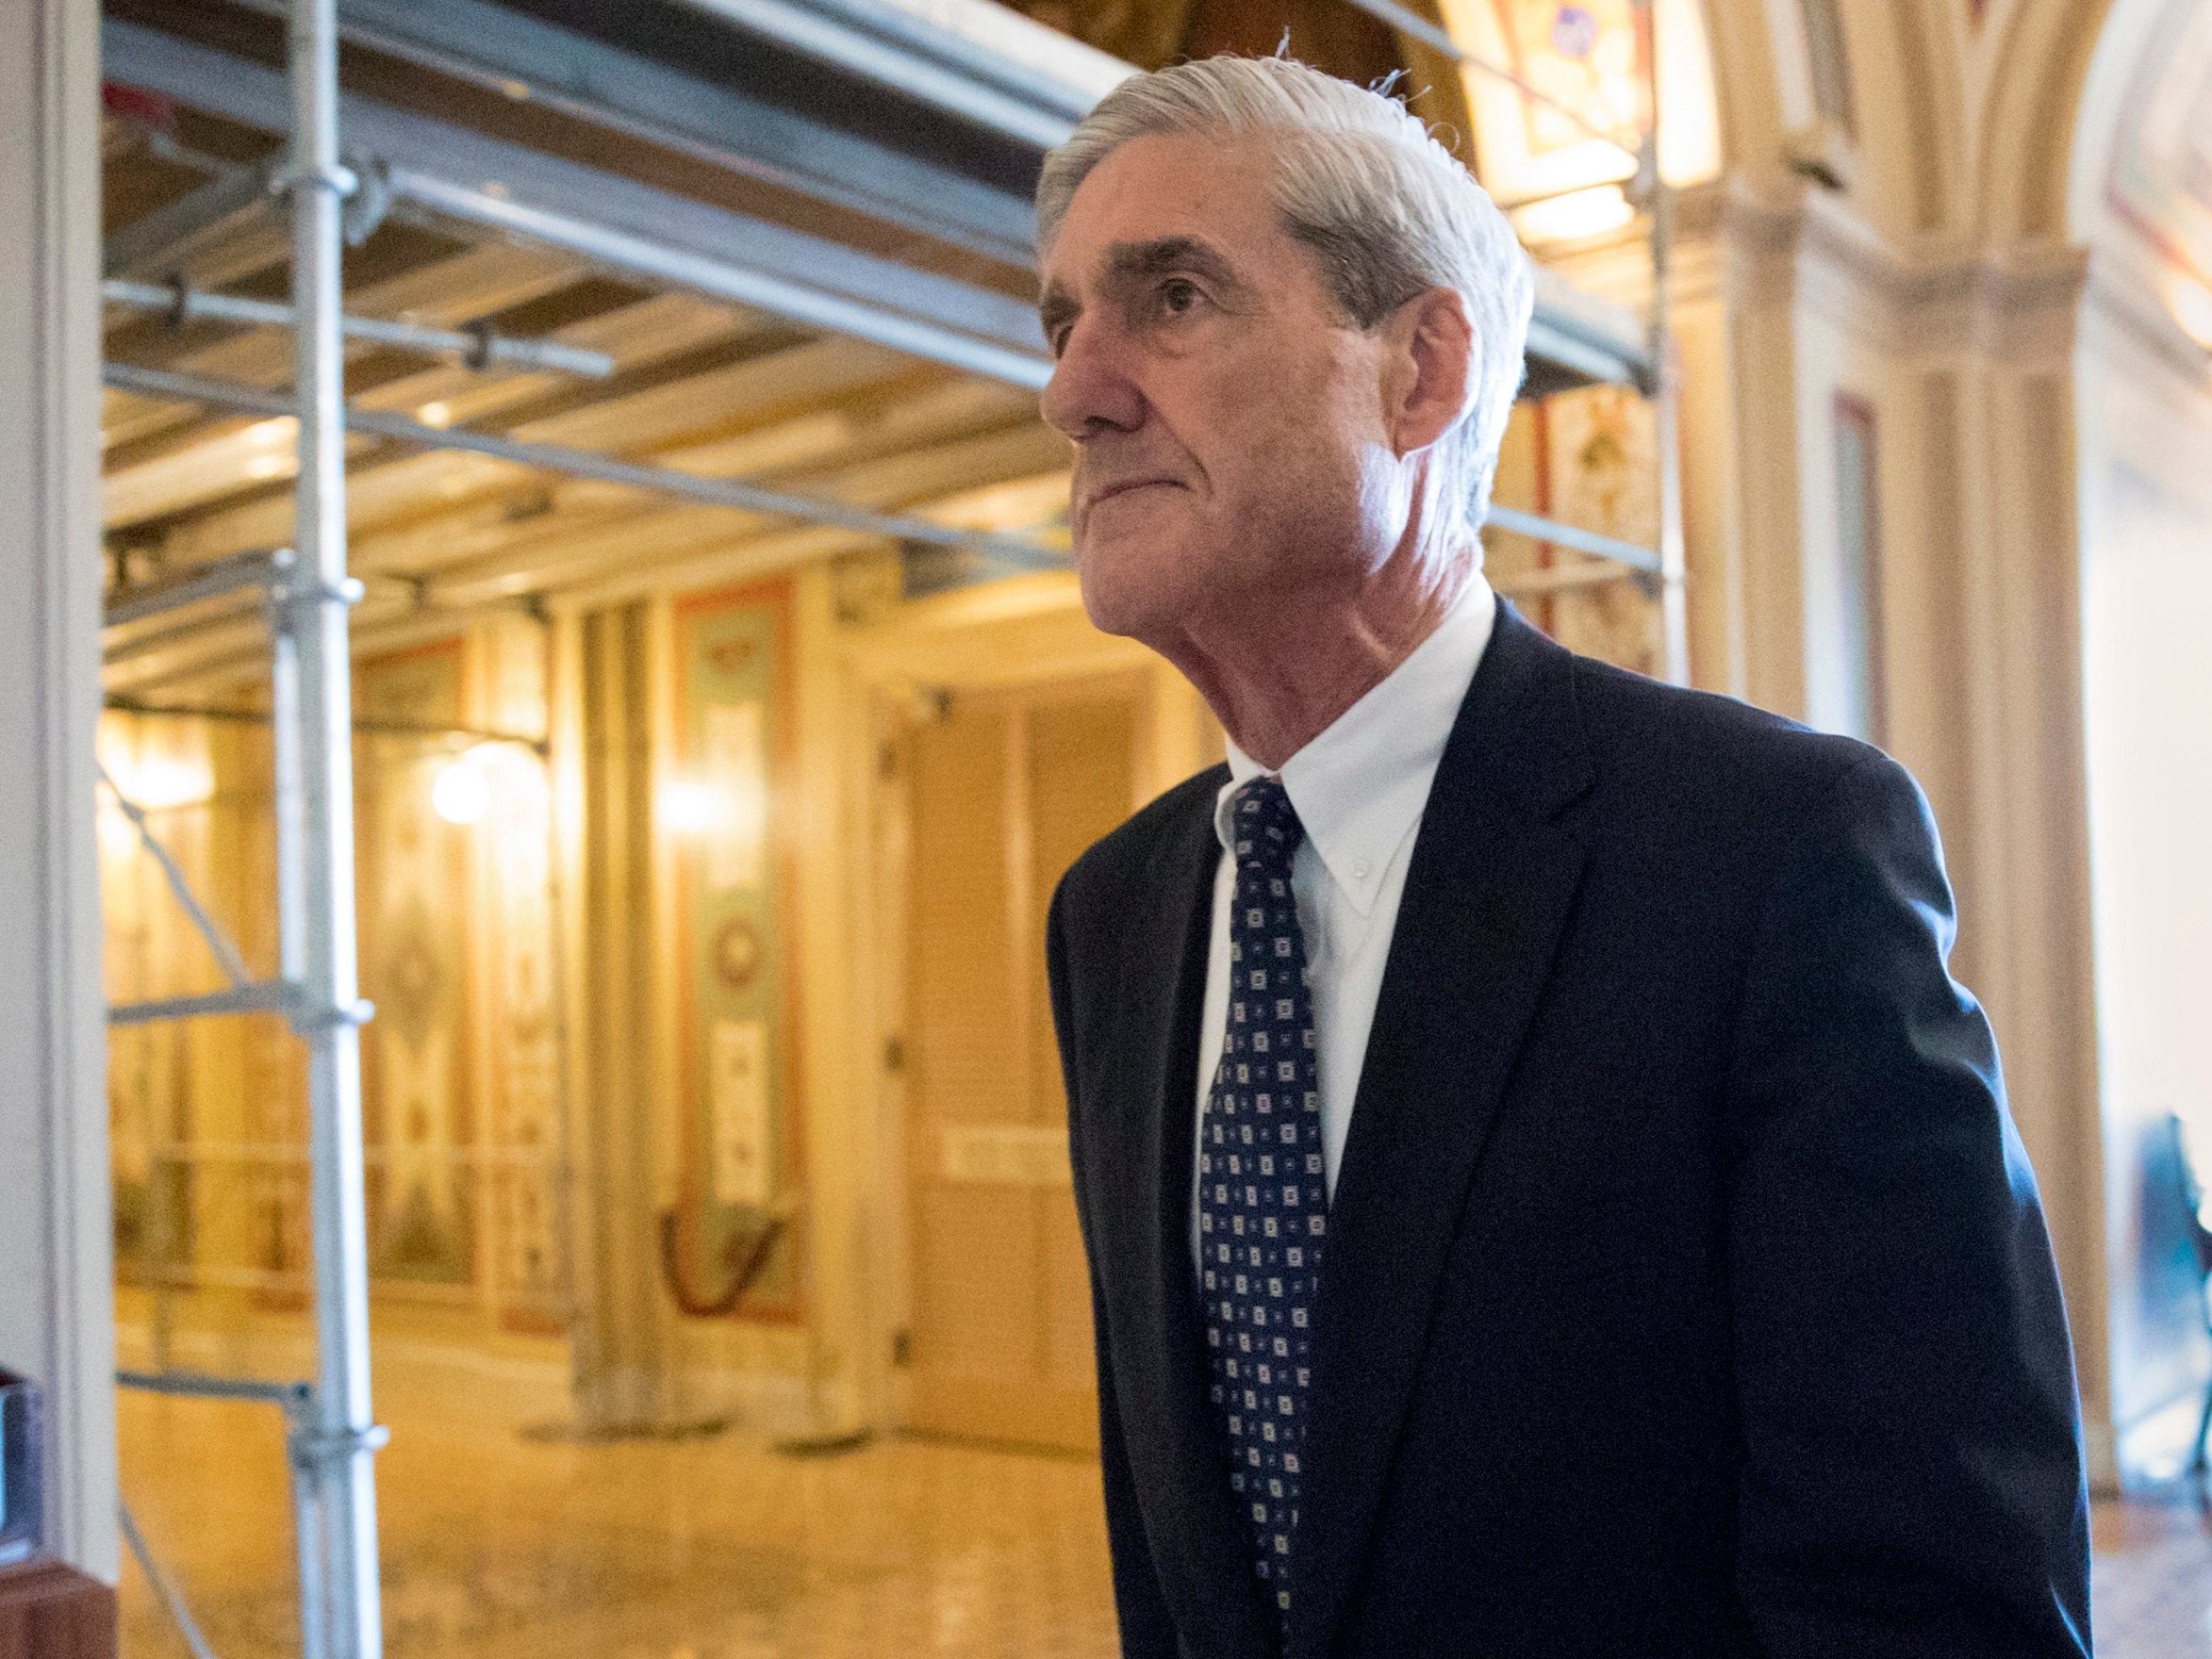 Robert Mueller is said to be nearing the end of his investigation into Russian interference in the US election